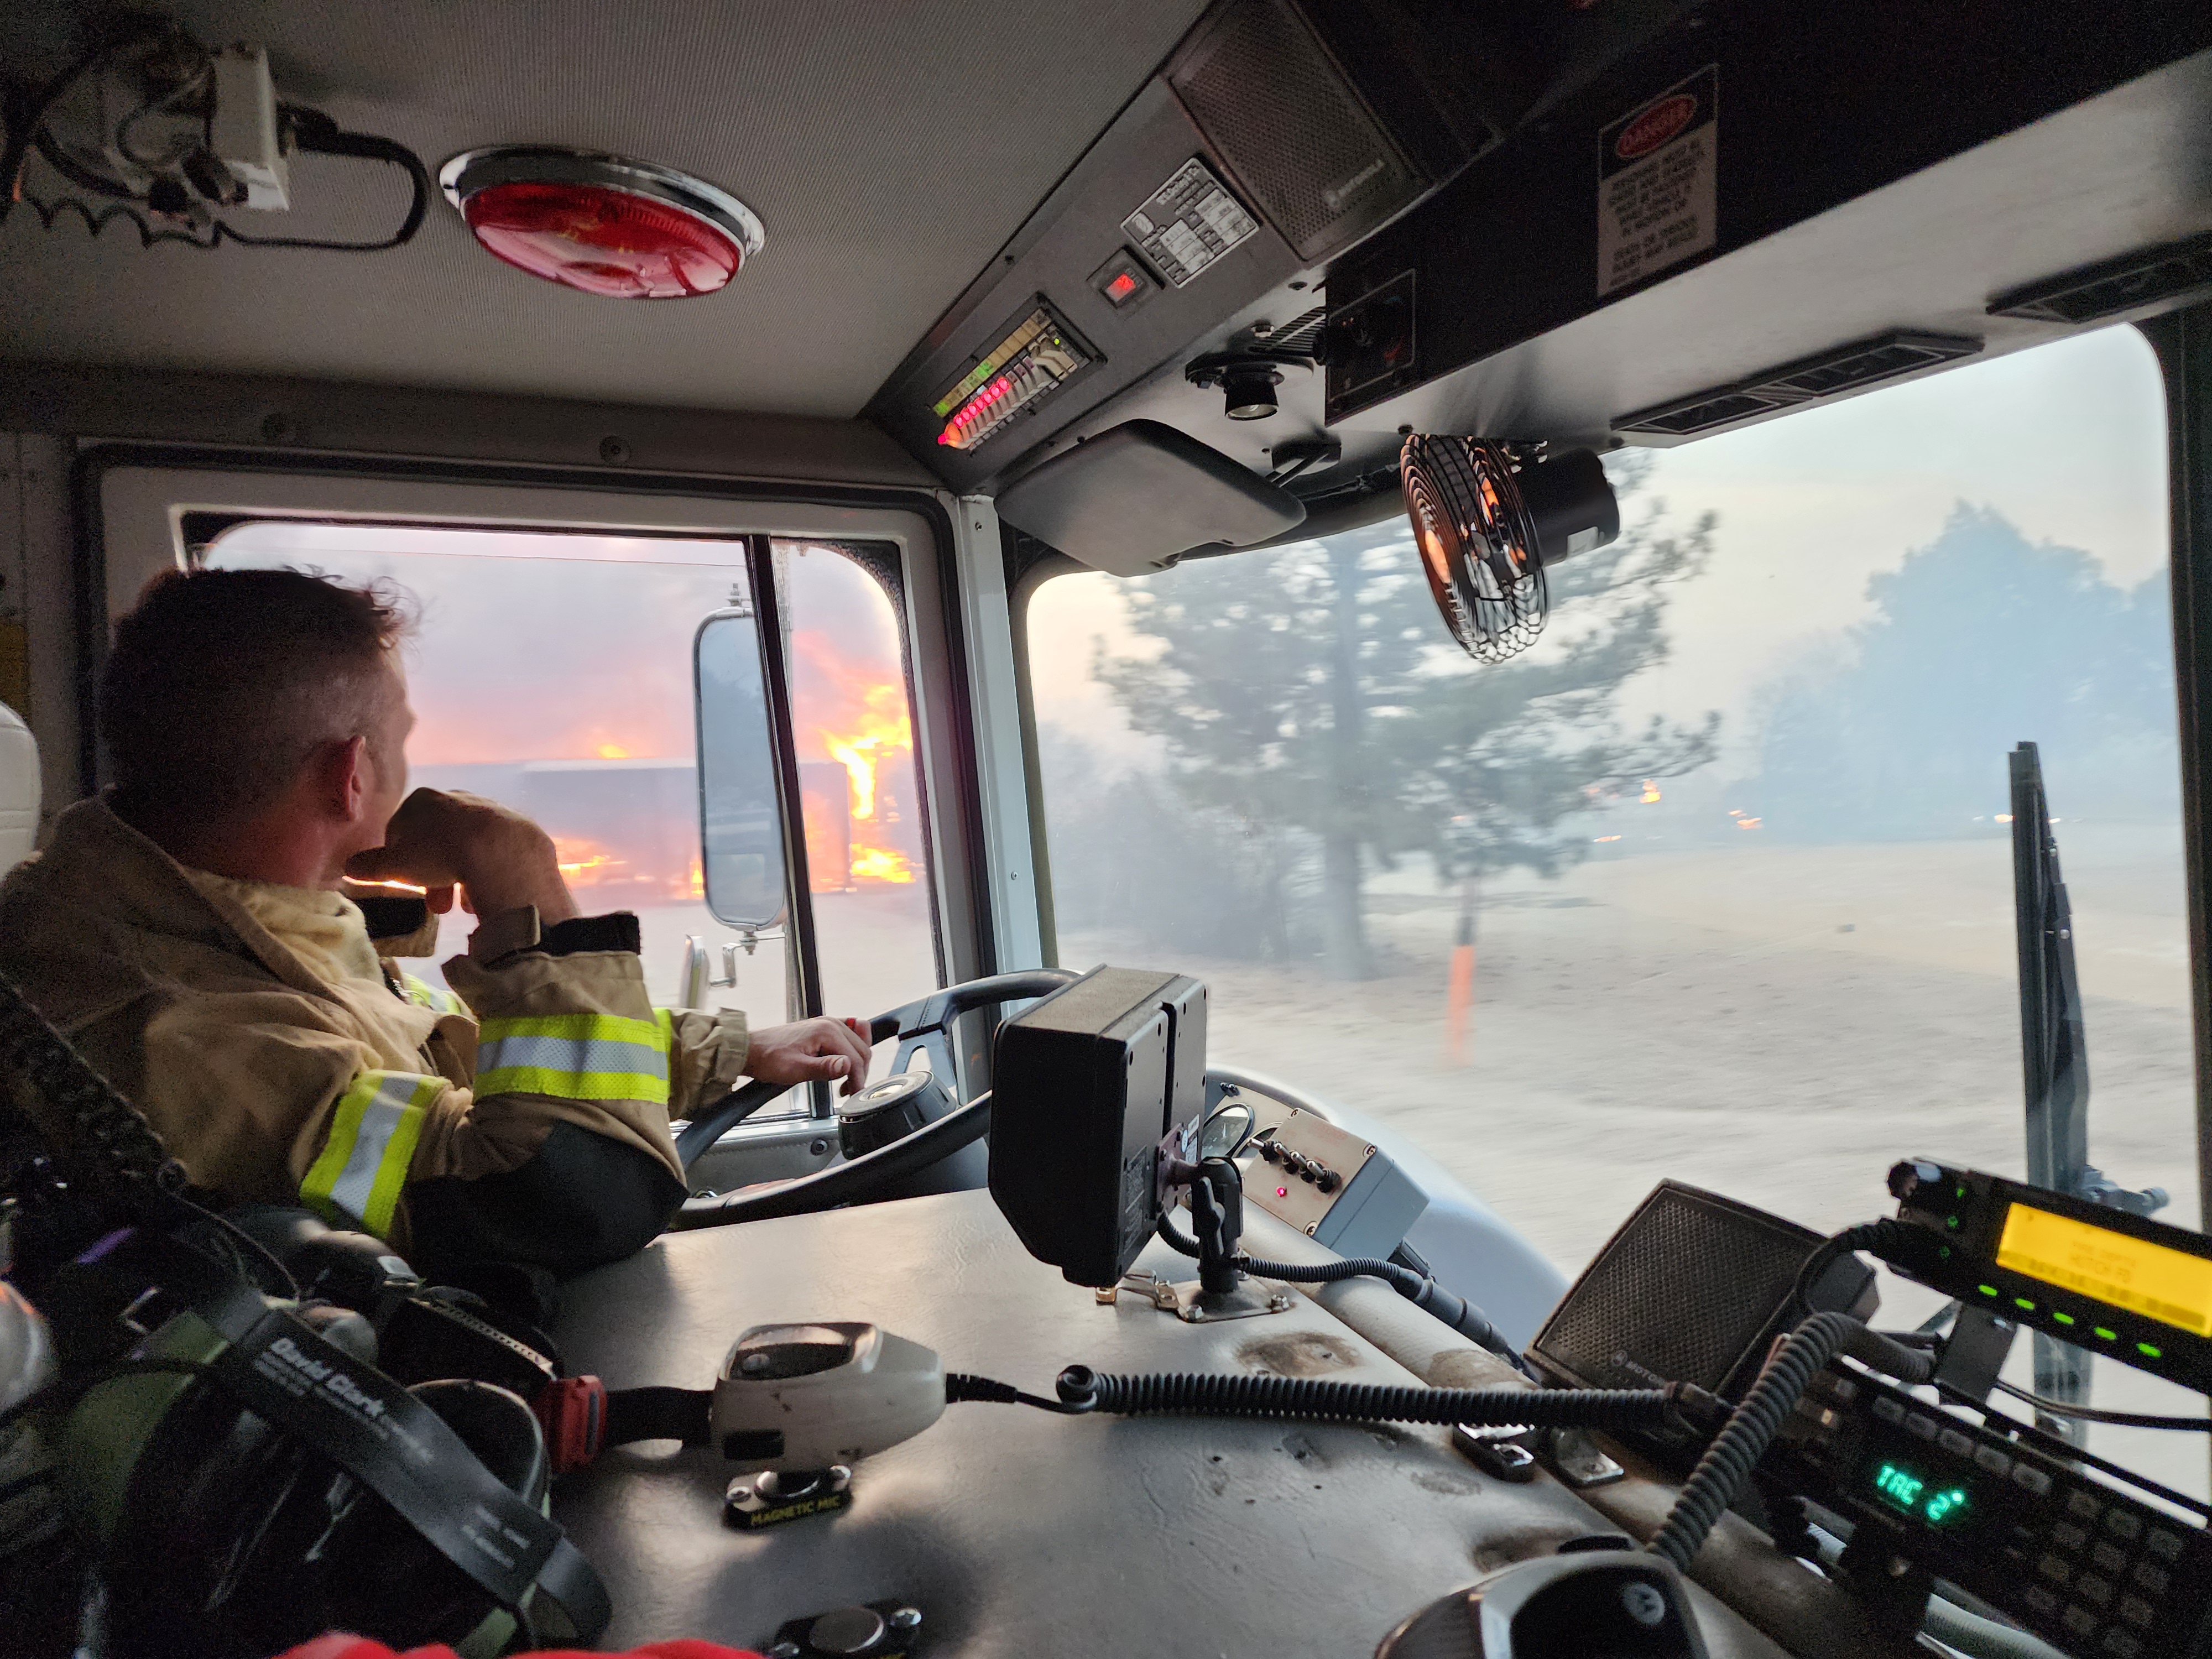   Pantex firefighters respond to local wildfires under mutual aid agreement. 